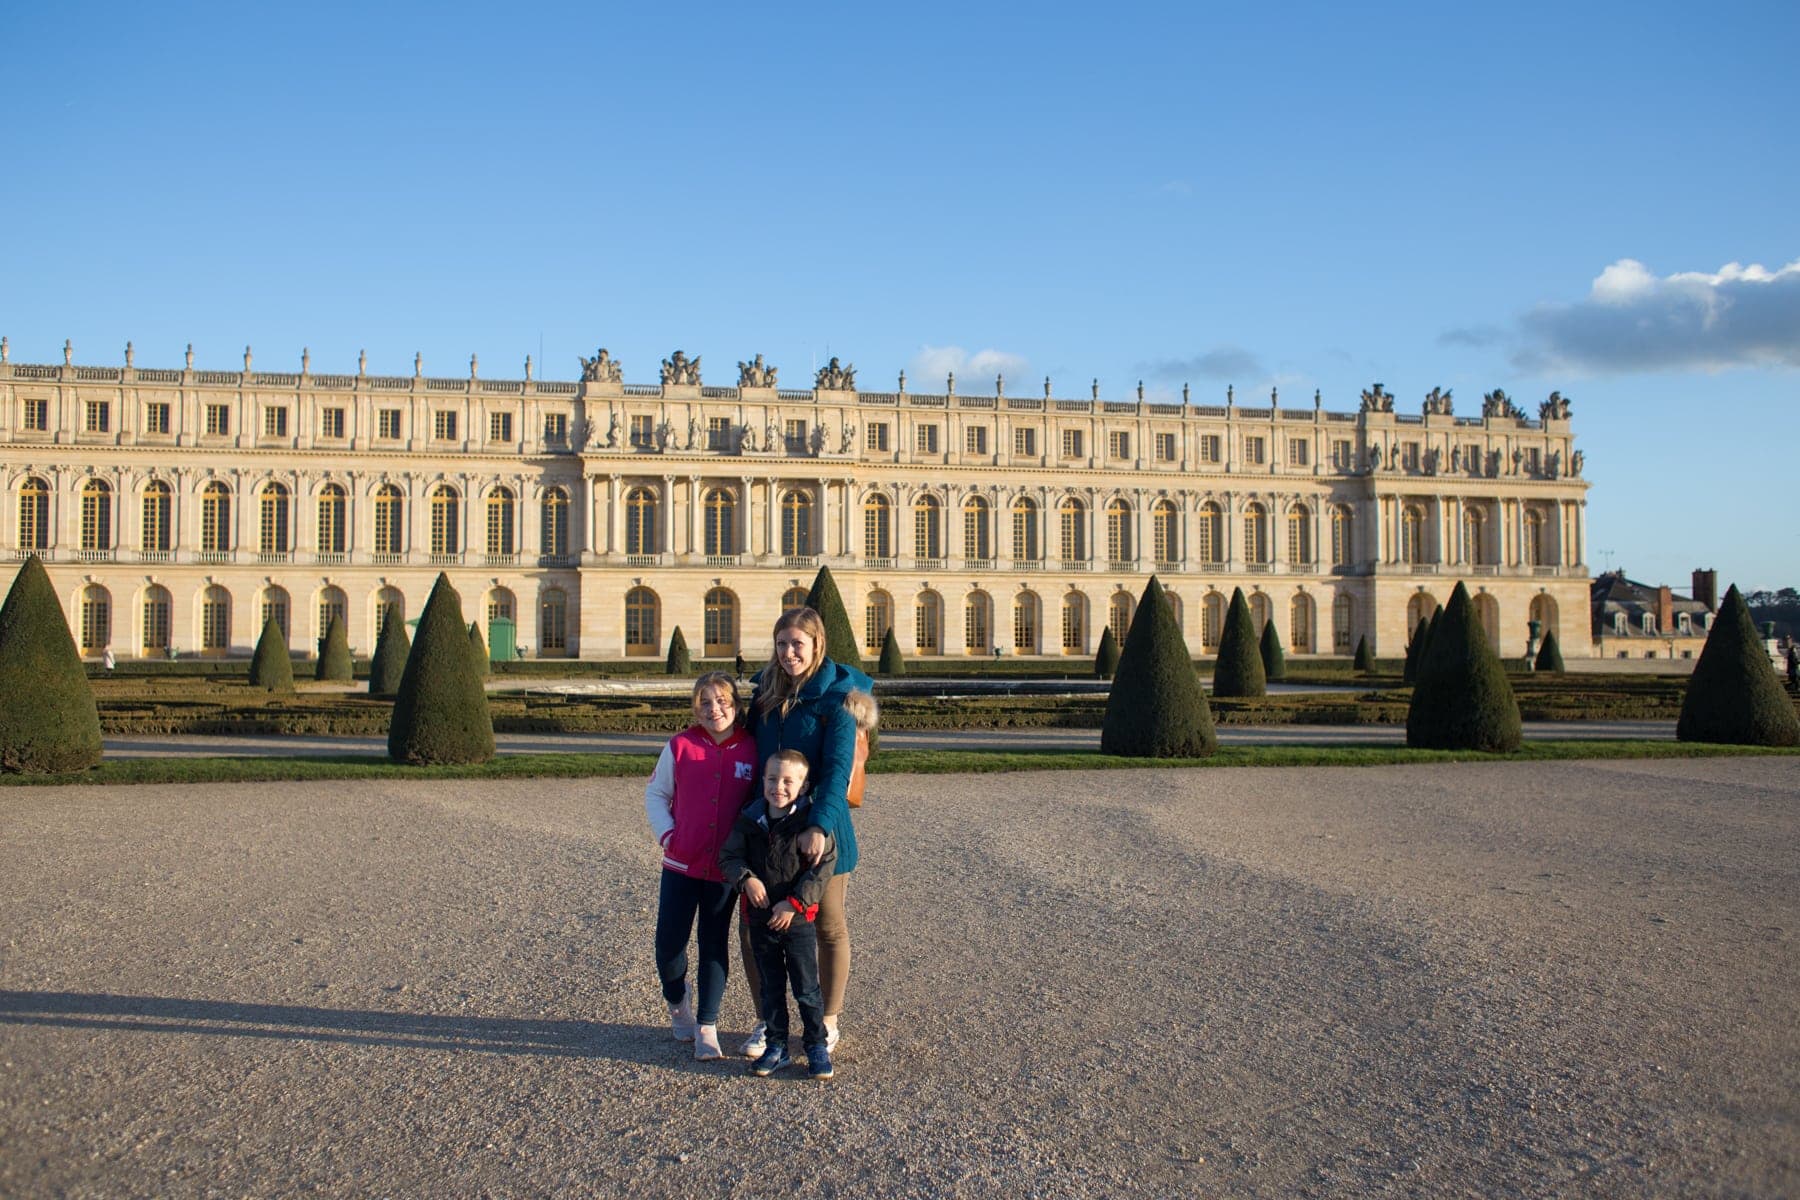 Lauren and kids standing in front of the palace